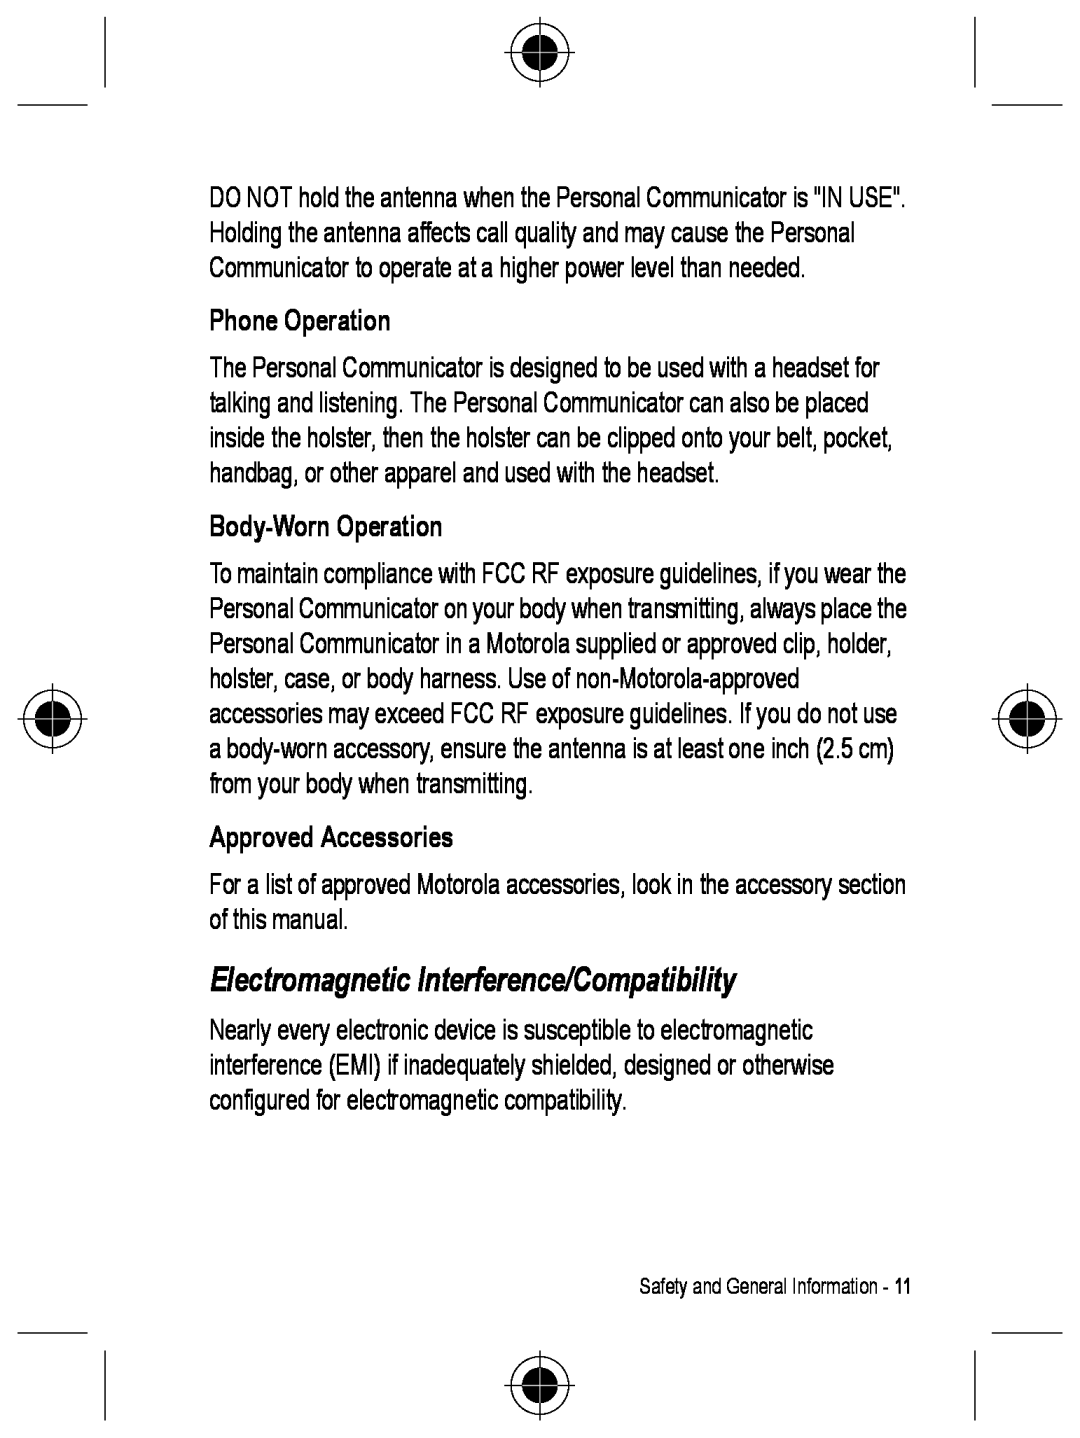 Motorola C330 manual Electromagnetic Interference/Compatibility, Phone Operation, Body-Worn Operation, Approved Accessories 